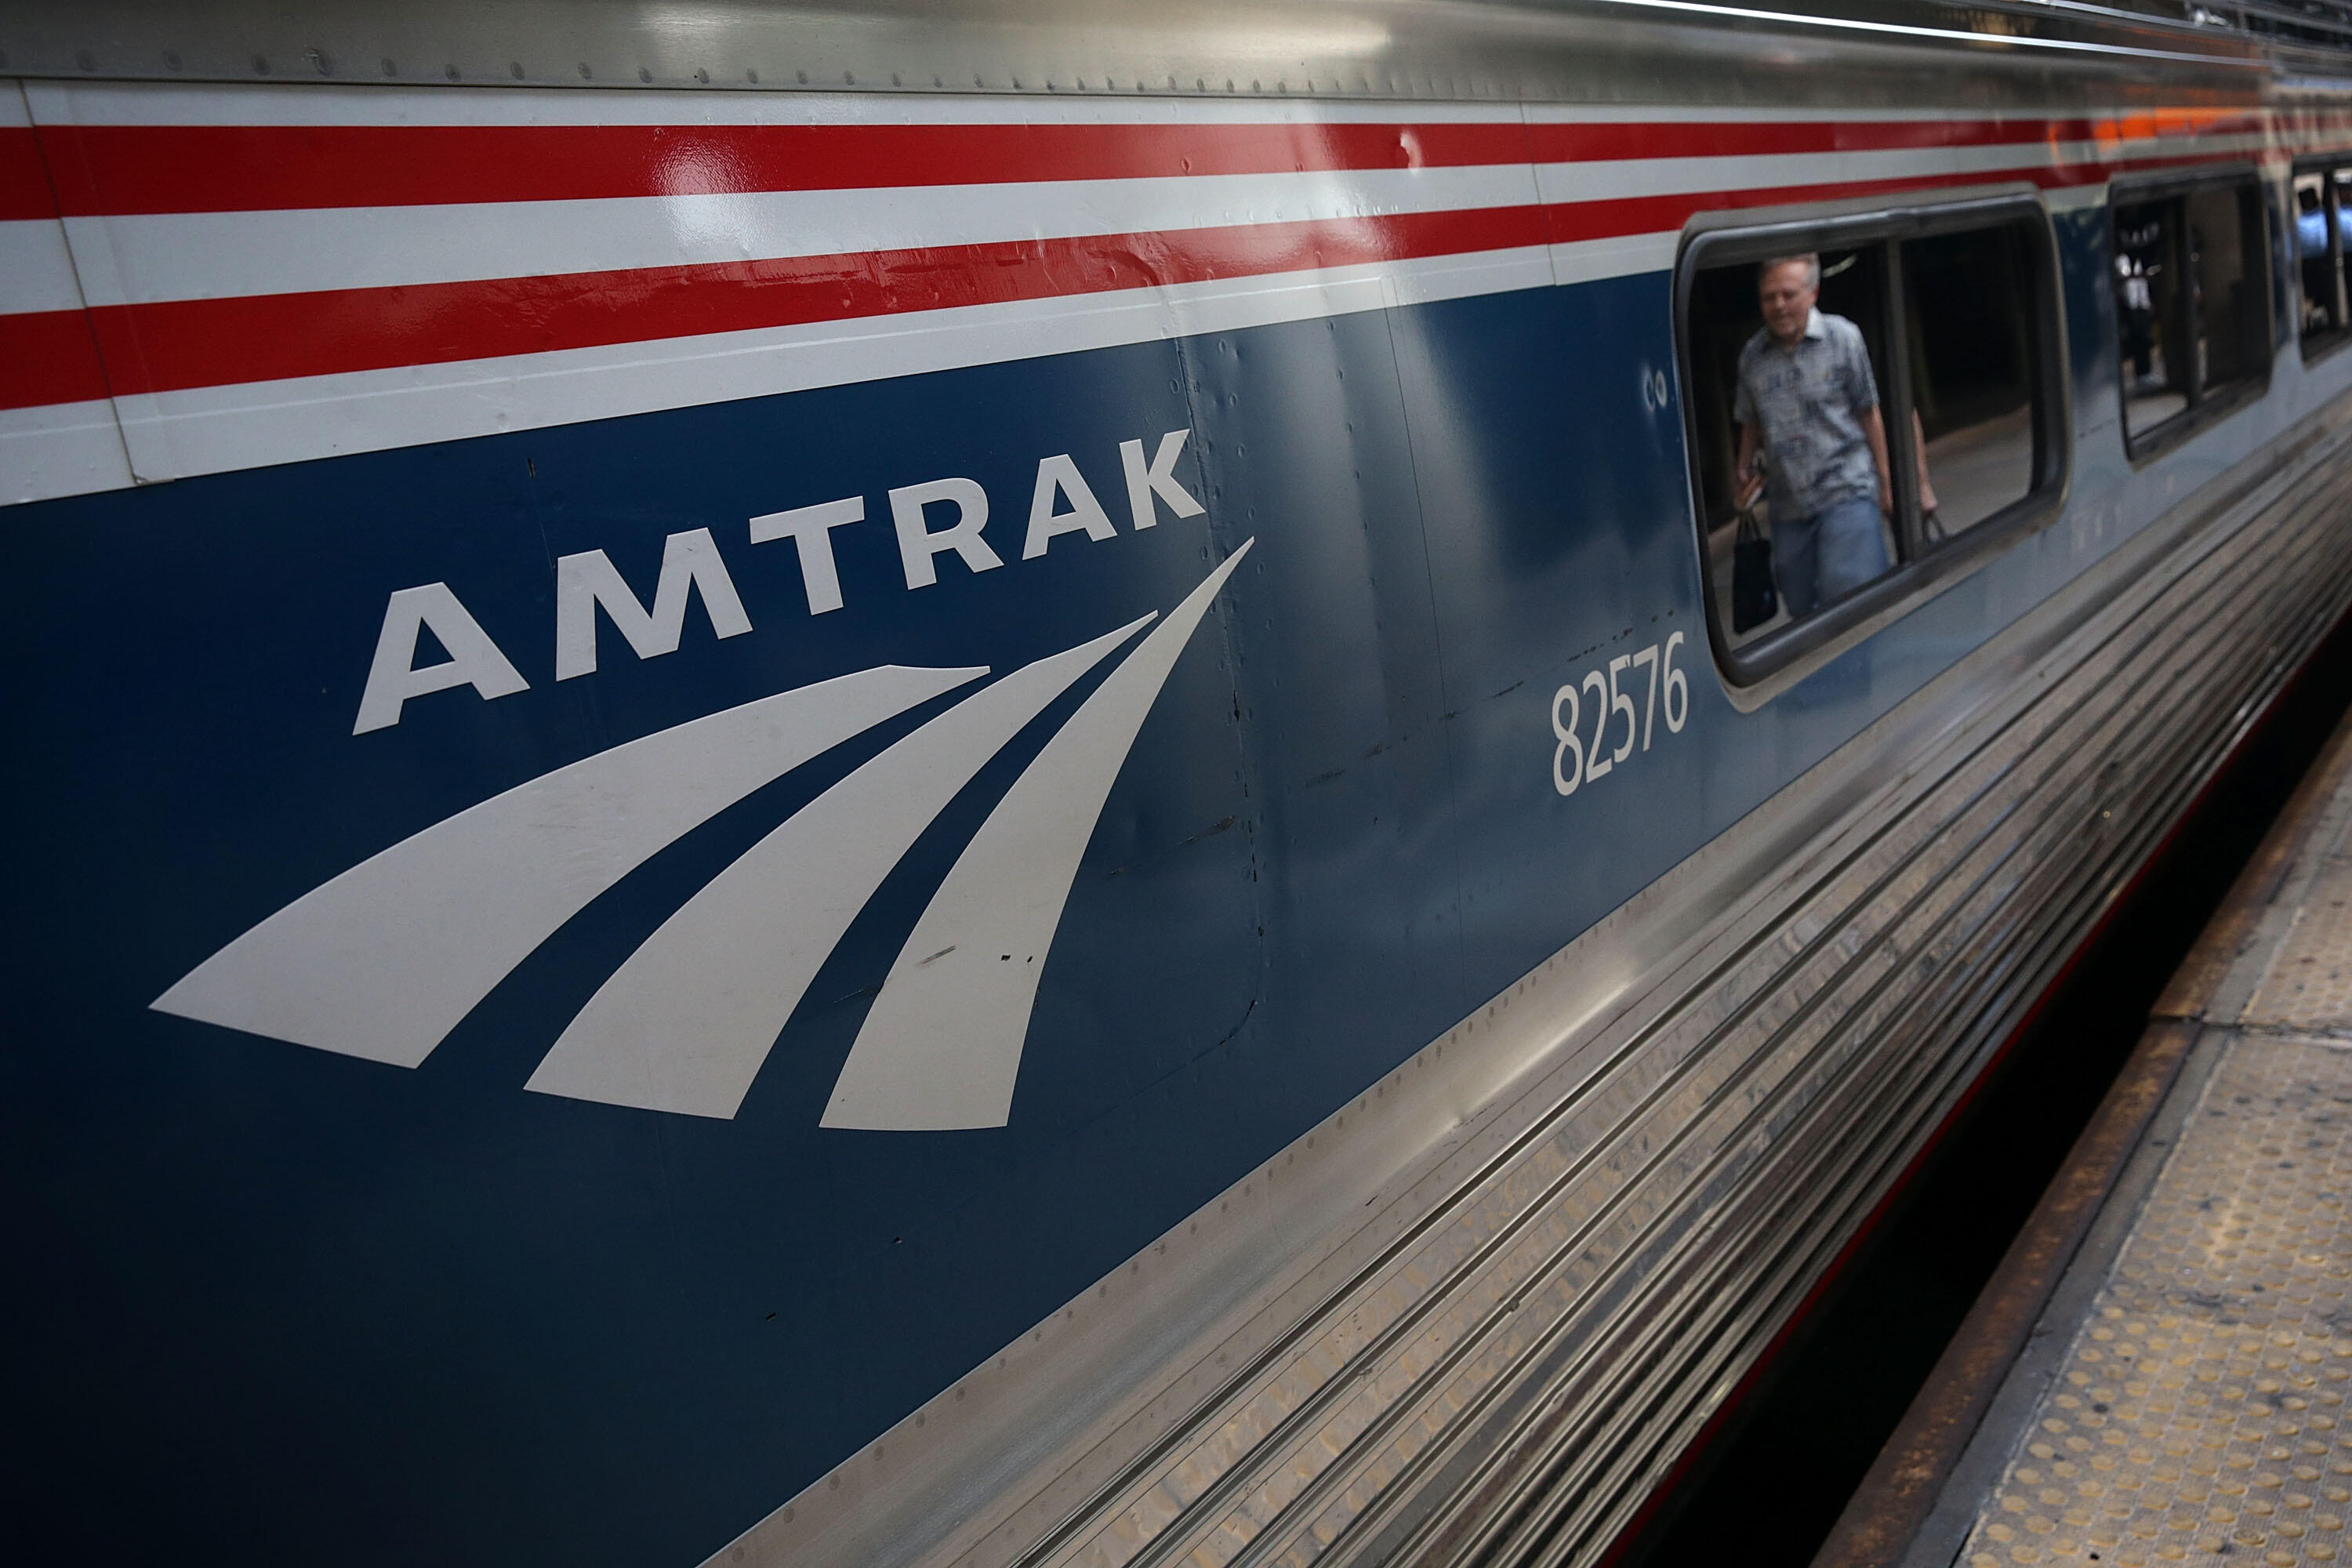 WASHINGTON, DC - SEPTEMBER 03:  A passenger passes by an Amtrak train September 3, 2015 at Union Station in Washington, DC. U.S. Secretary of Homeland Security Jeh Johnson held a press availability to discuss Operation Railsafe.  (Photo by Alex Wong/Getty